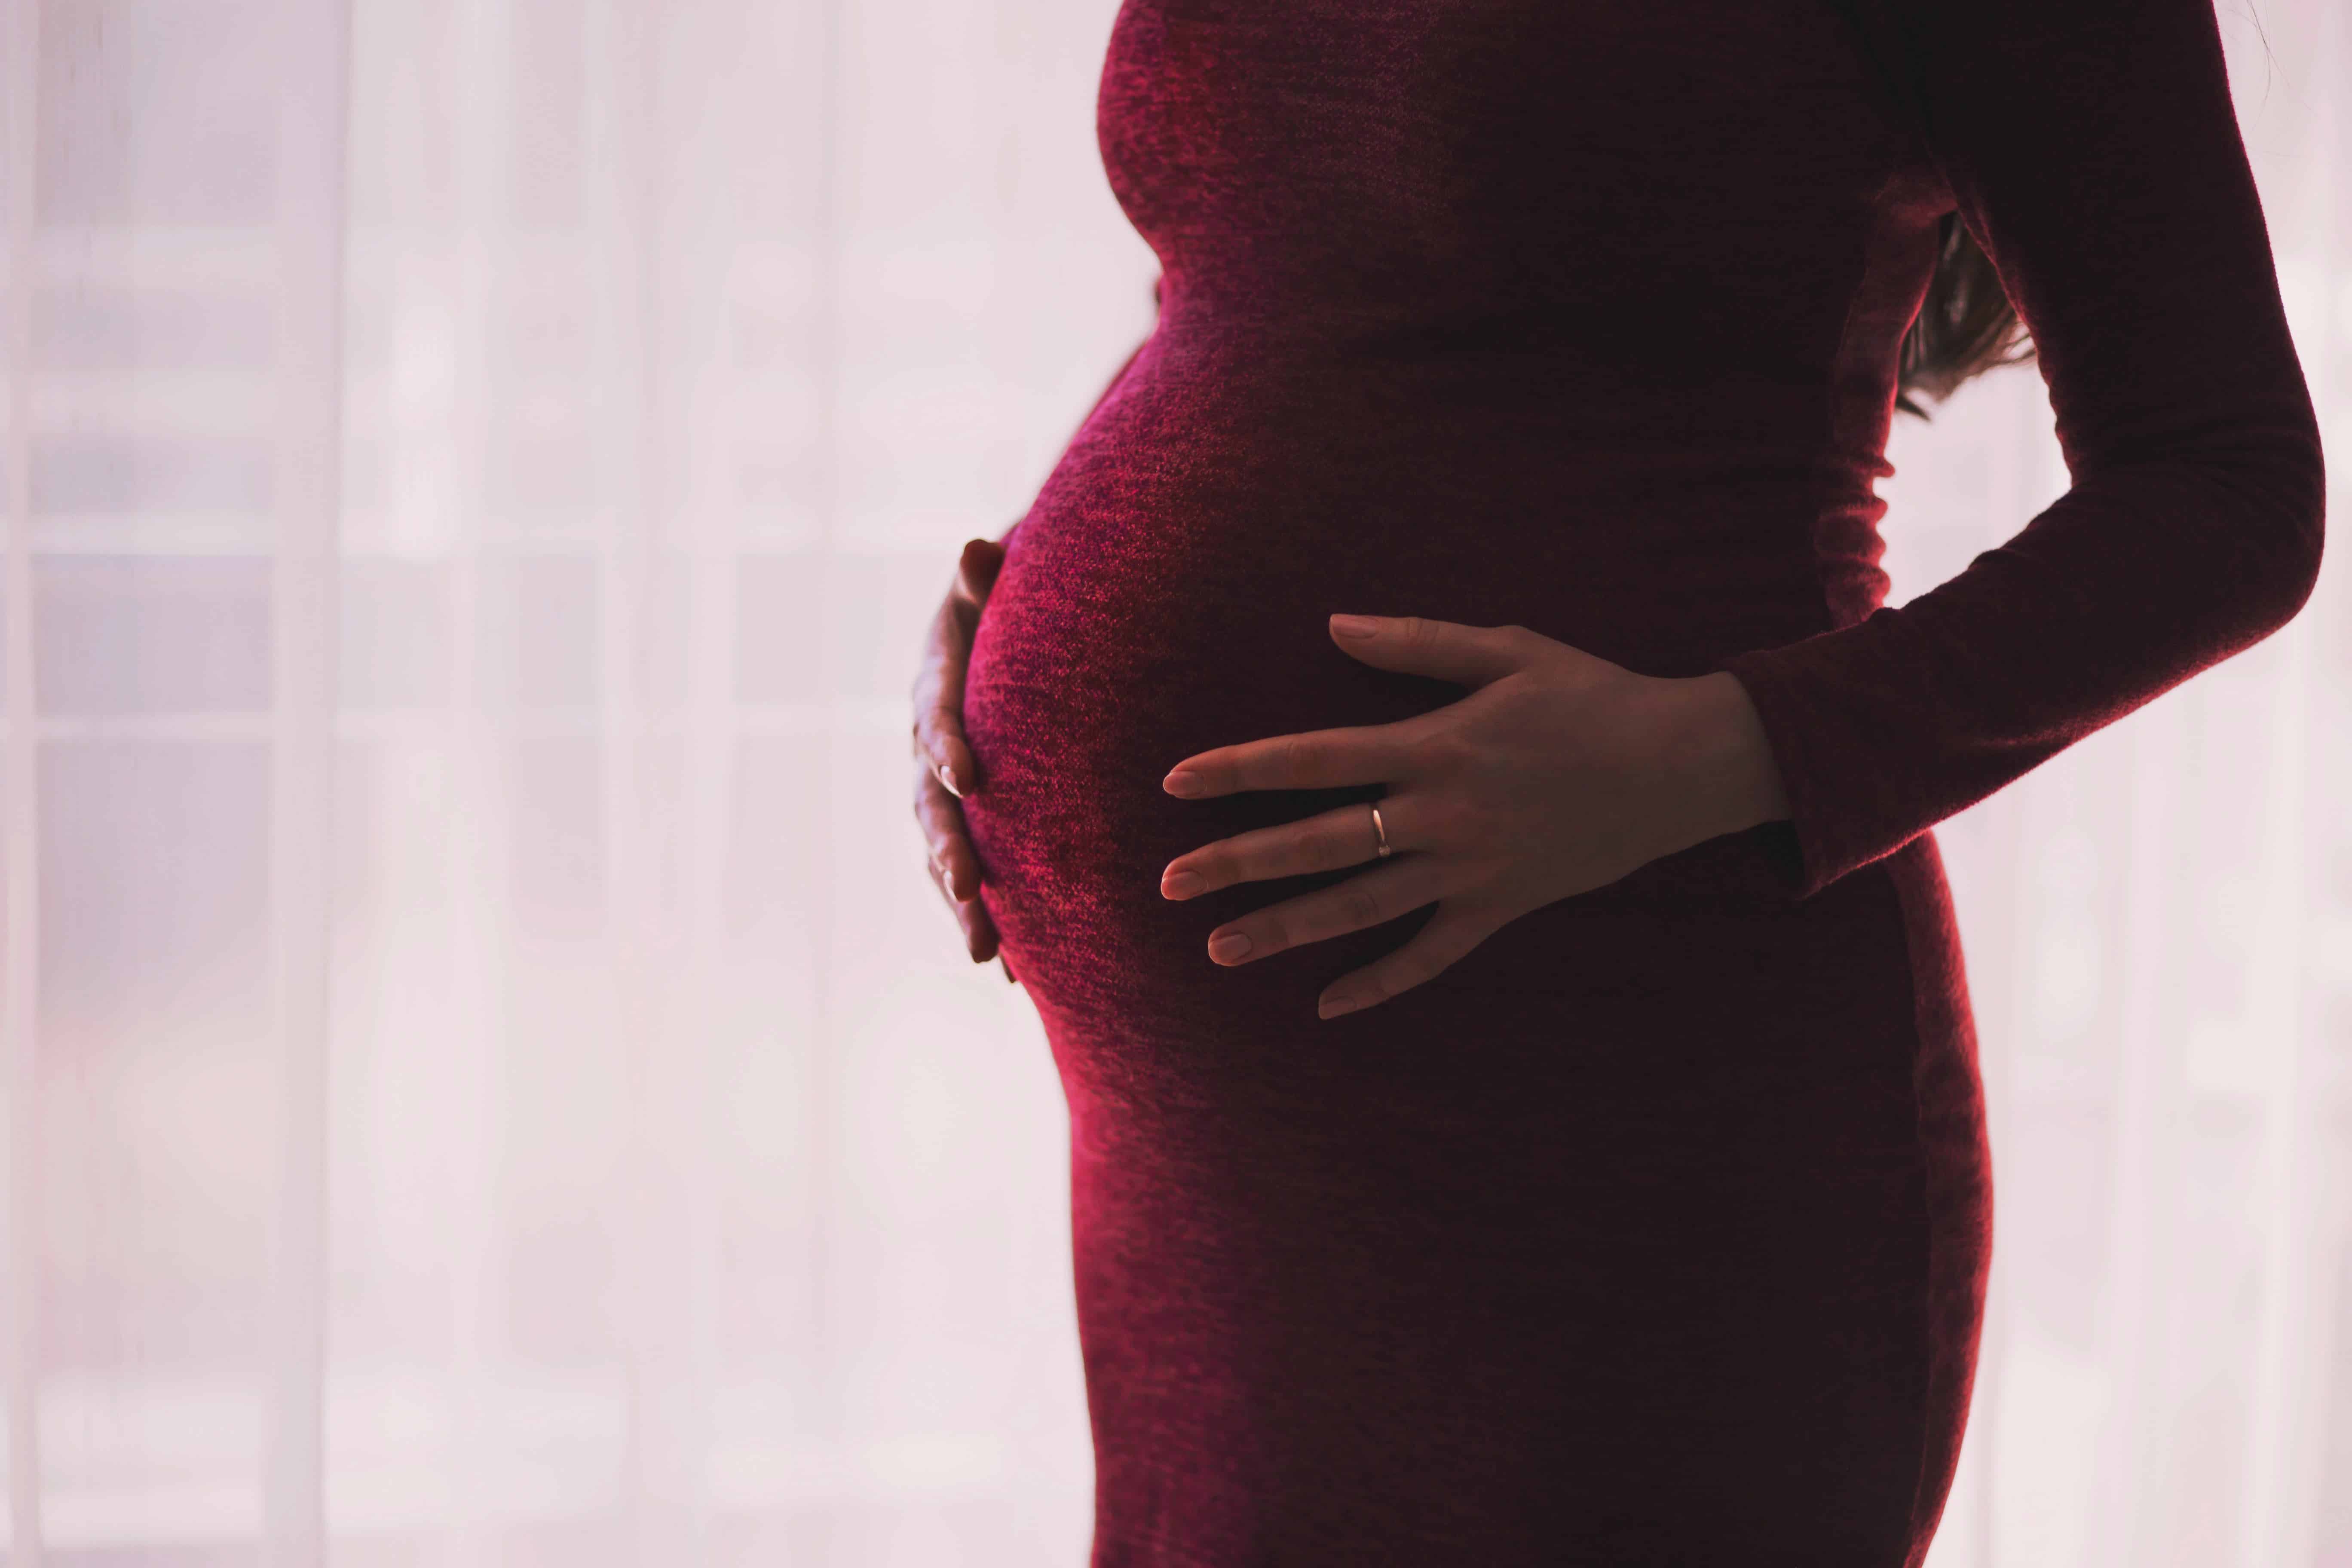 The chance of a pregnancy with in vitro fertilization decreases with age. Image credits: Pexels